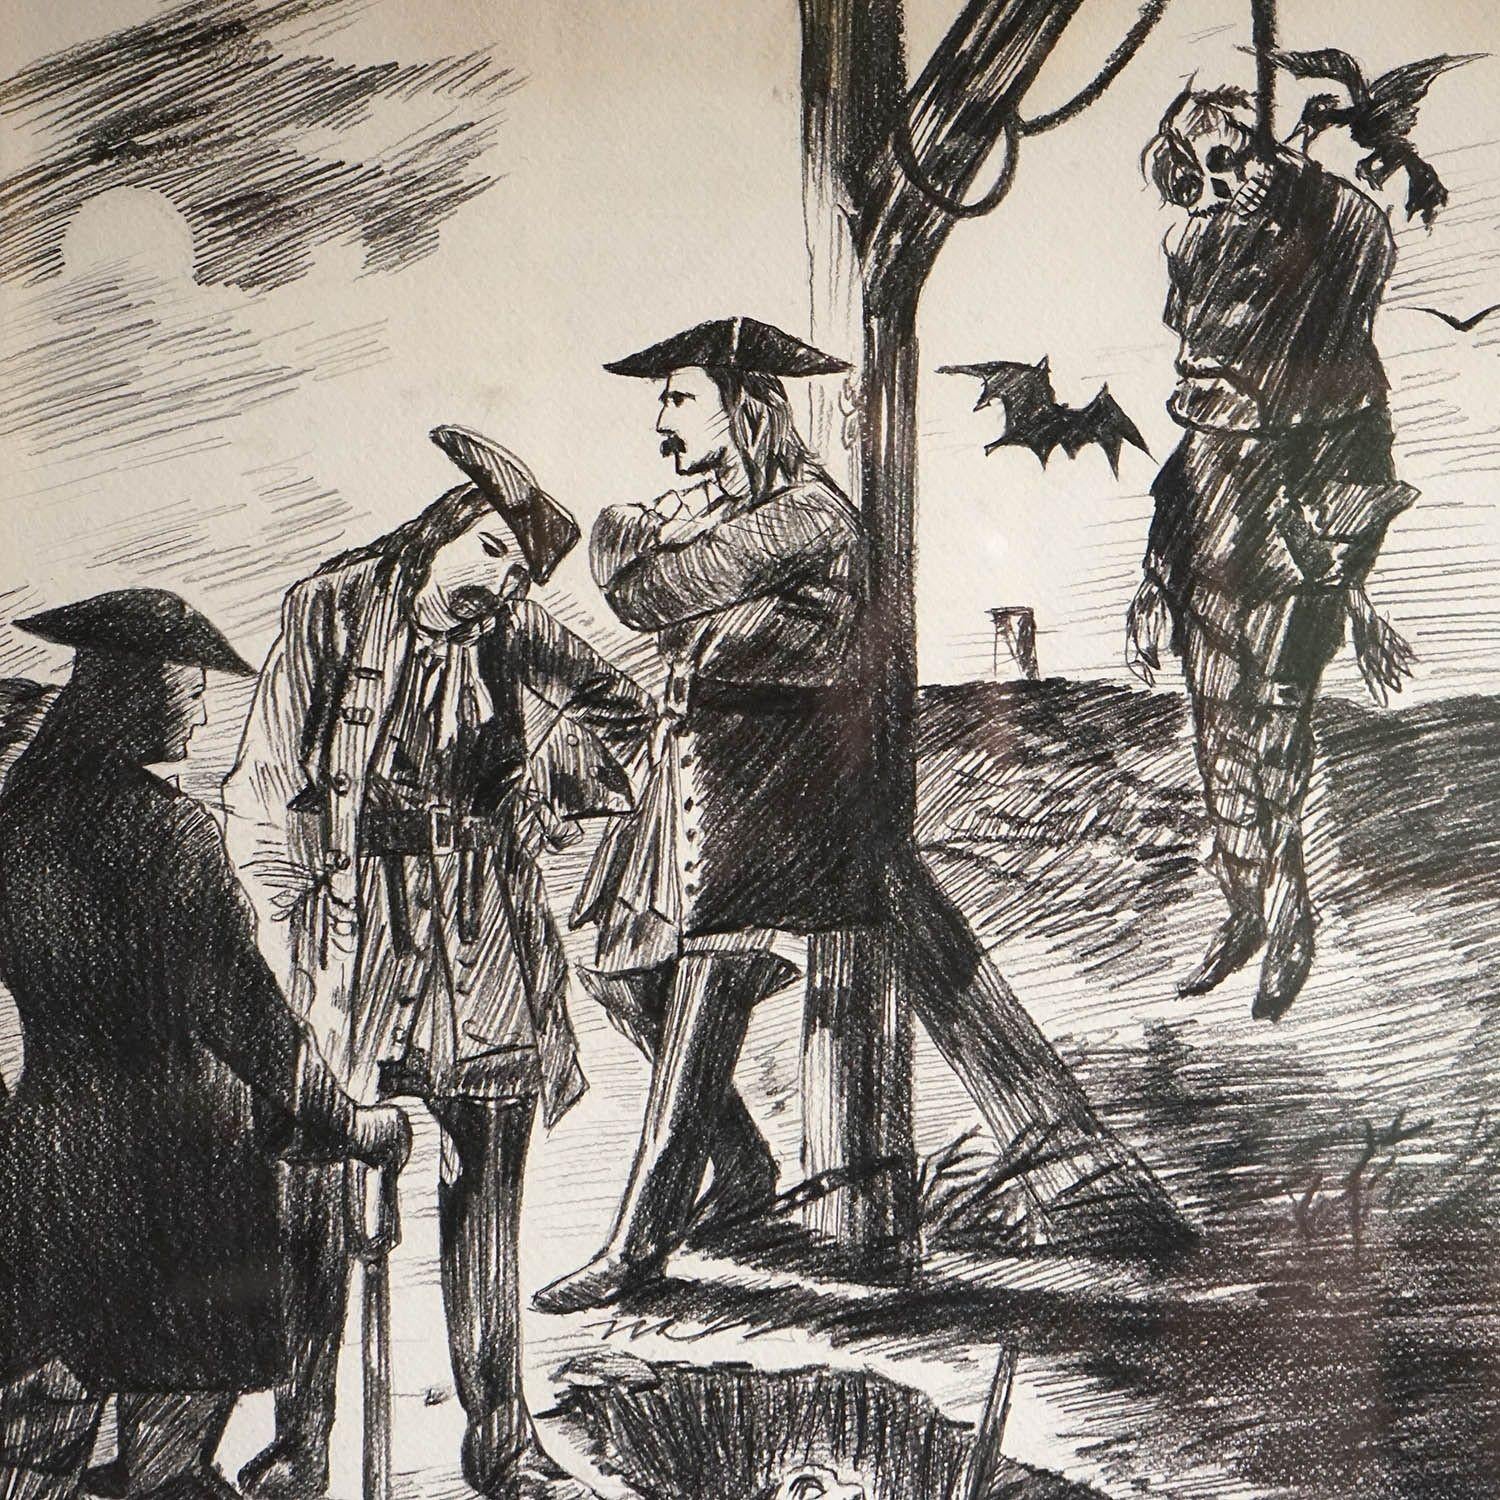 Vintage Original Pencil and Charcoal Studies

The two courtroom scenes are after original drawings by celebrated French artist Honoré Daumier. The two at the gallows appear to be completely original conceptions.

Probably dating to the early to